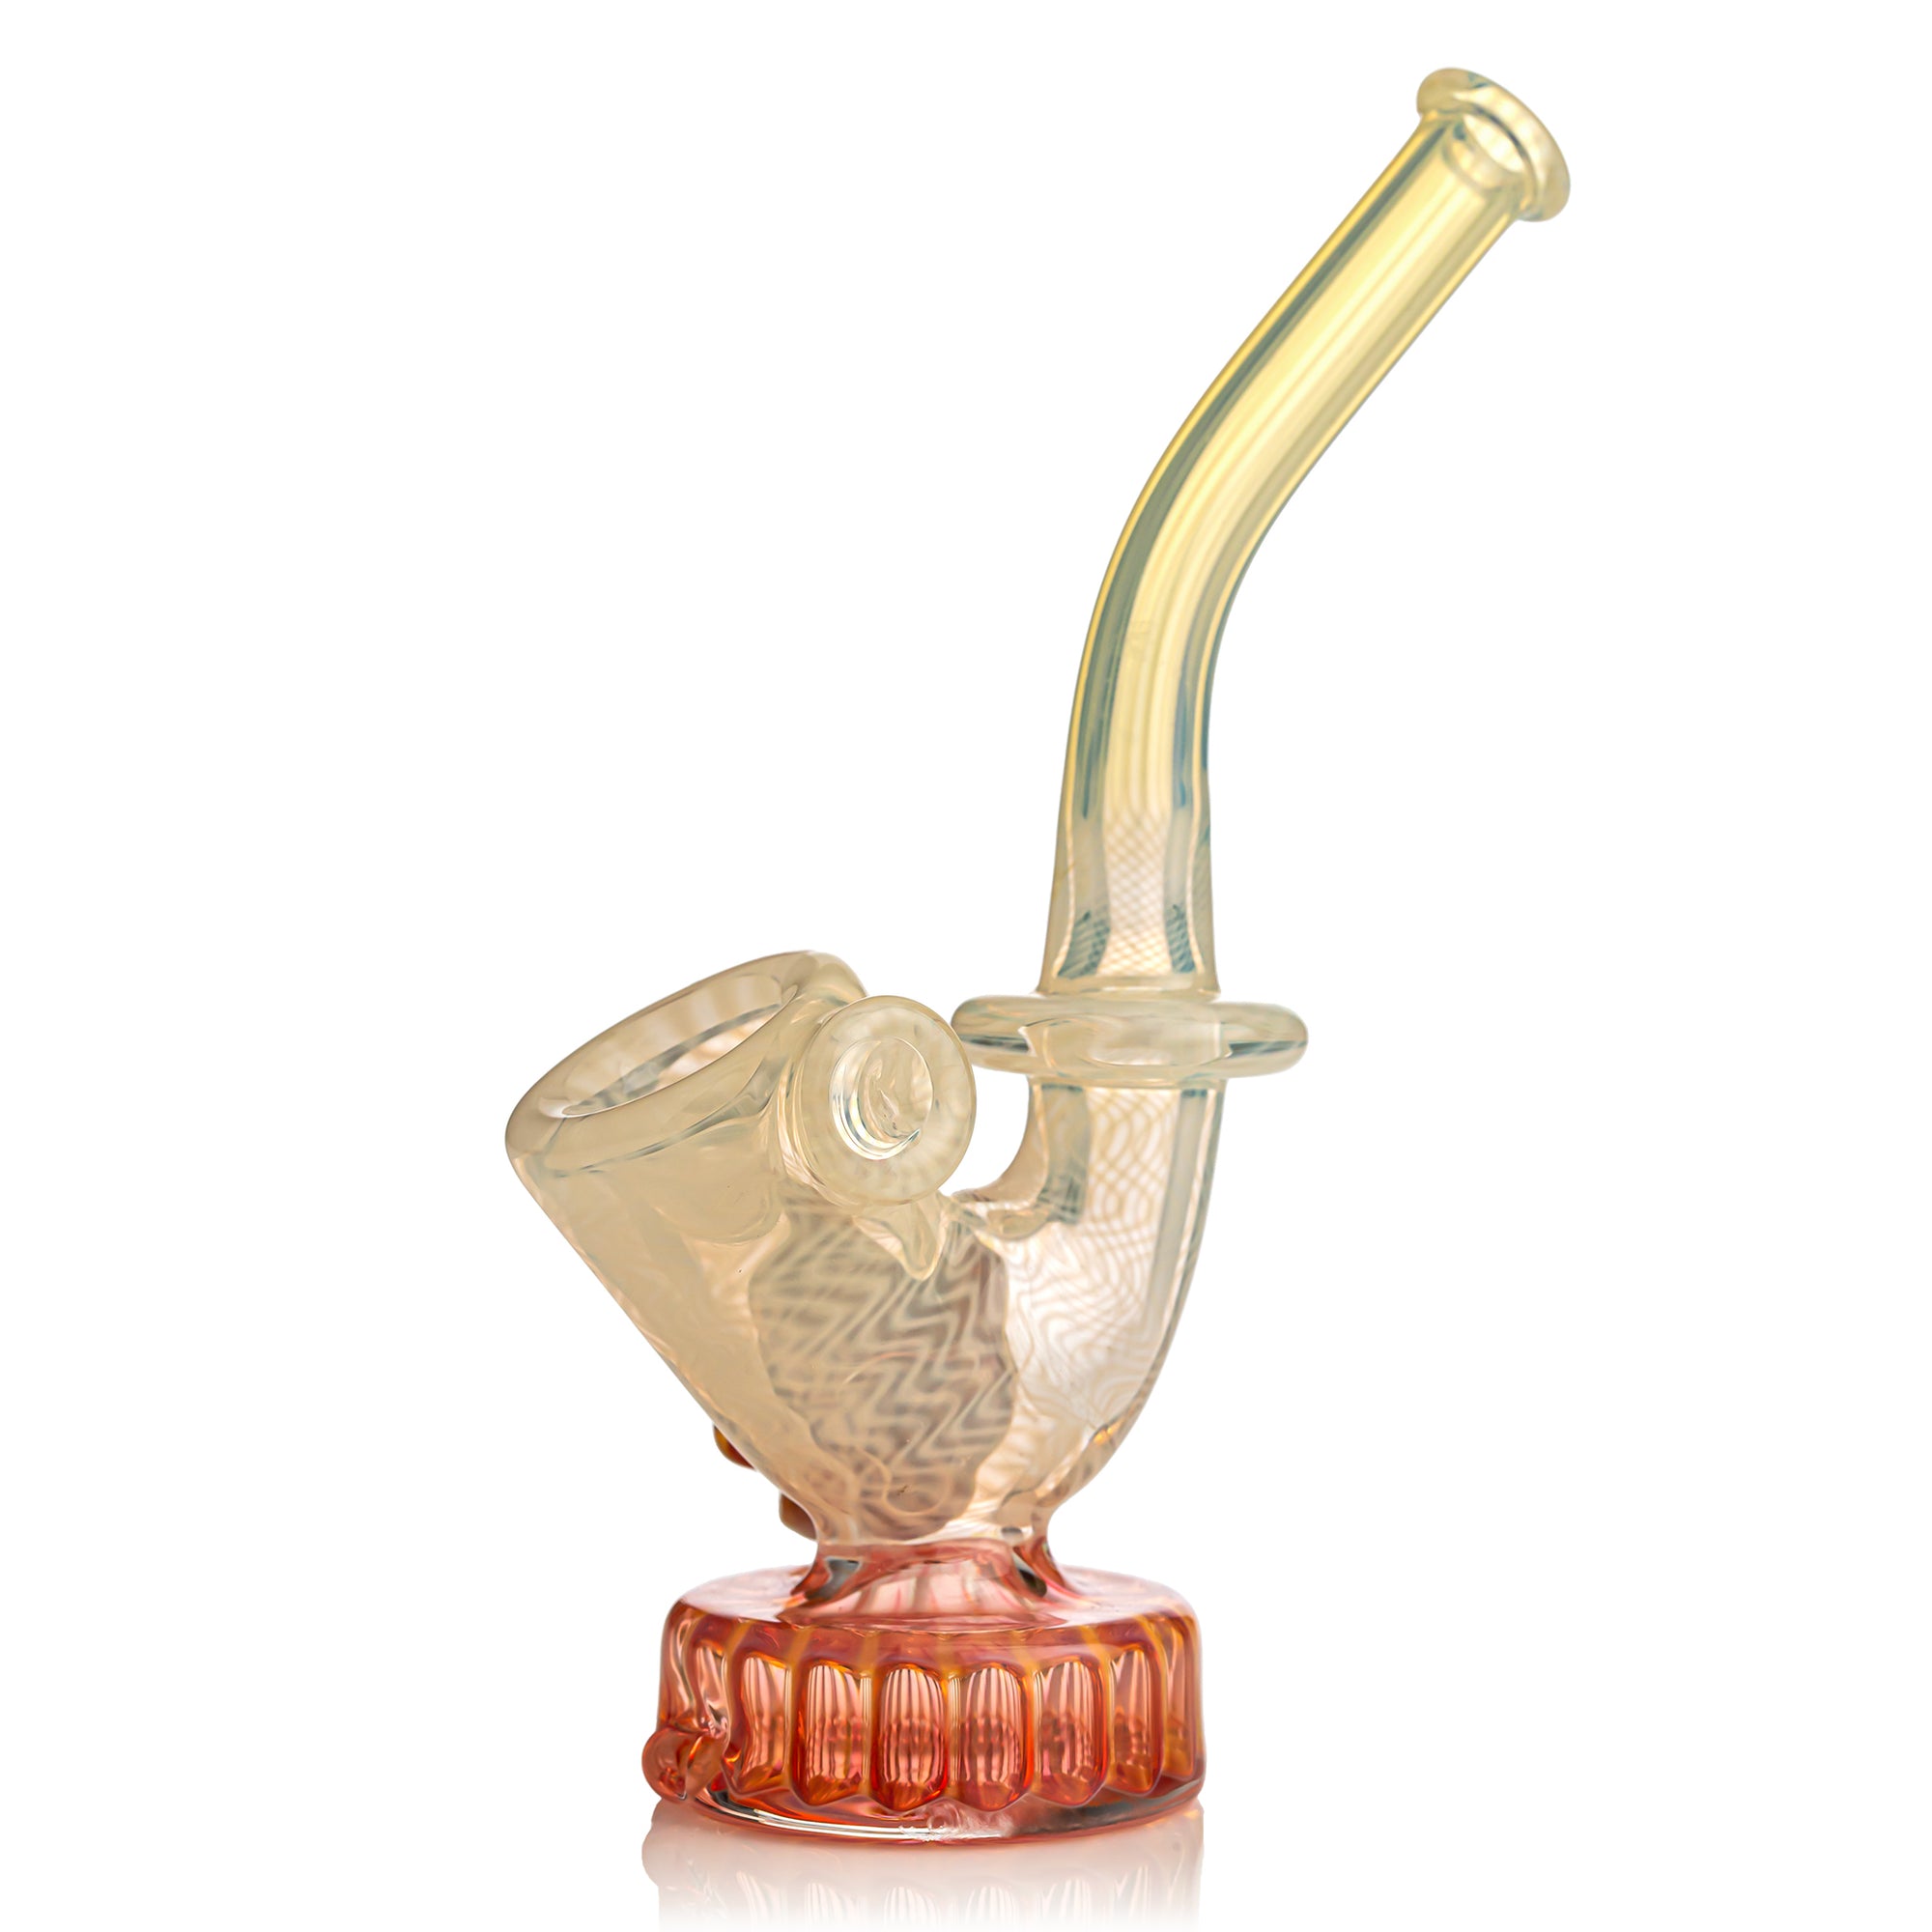 Silver Fume Sherlock Puffco Top with Gold Fumed Skull